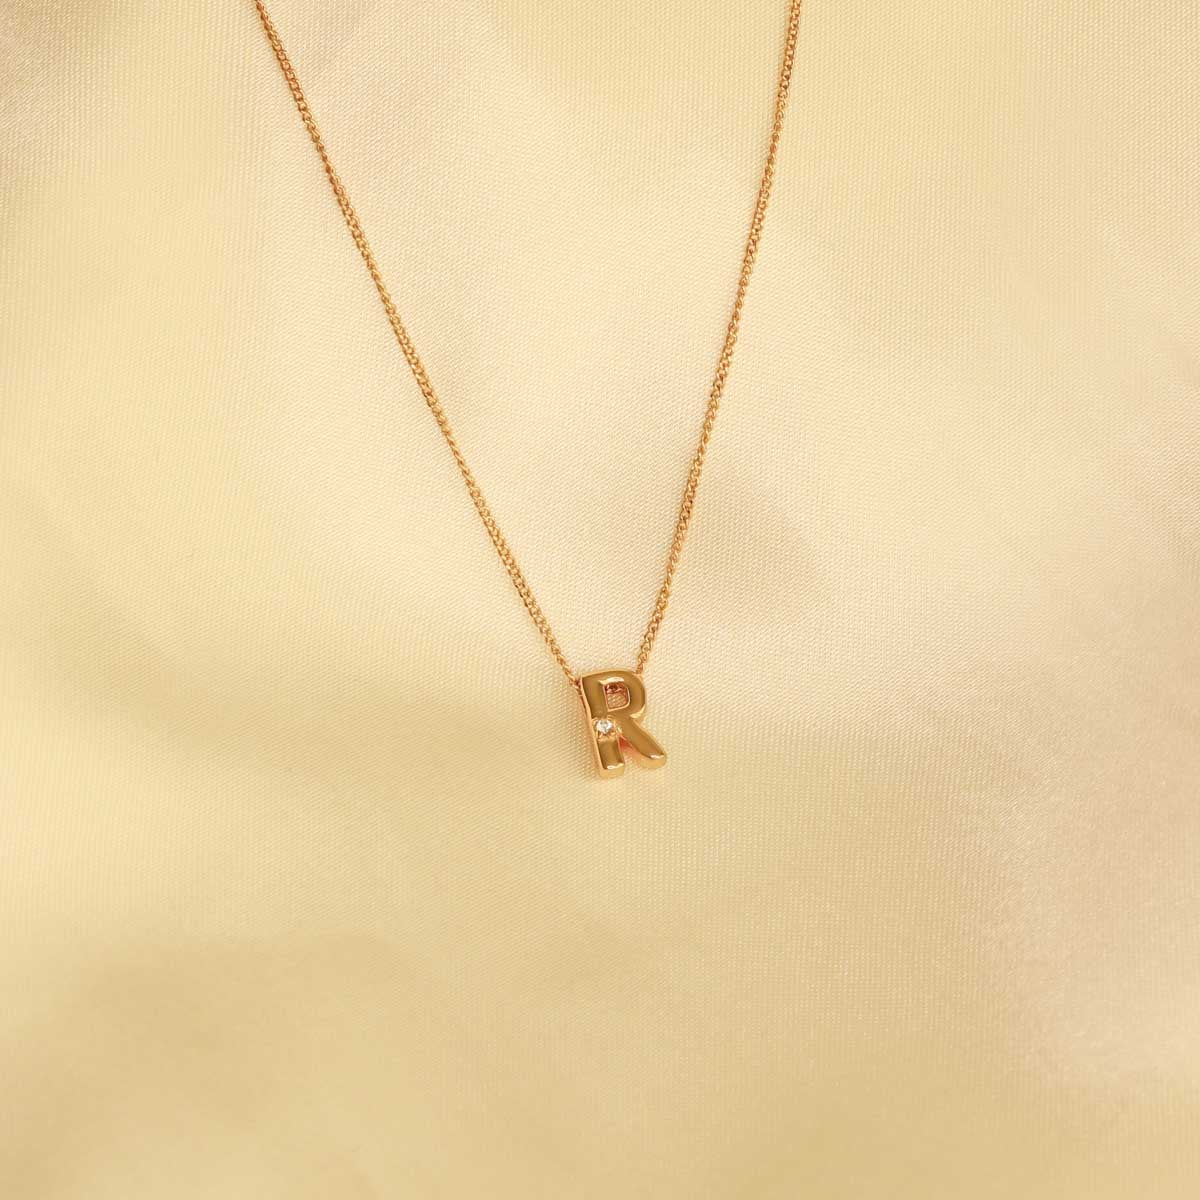 Flat lay shot of R Initial Pendant Necklace in Gold